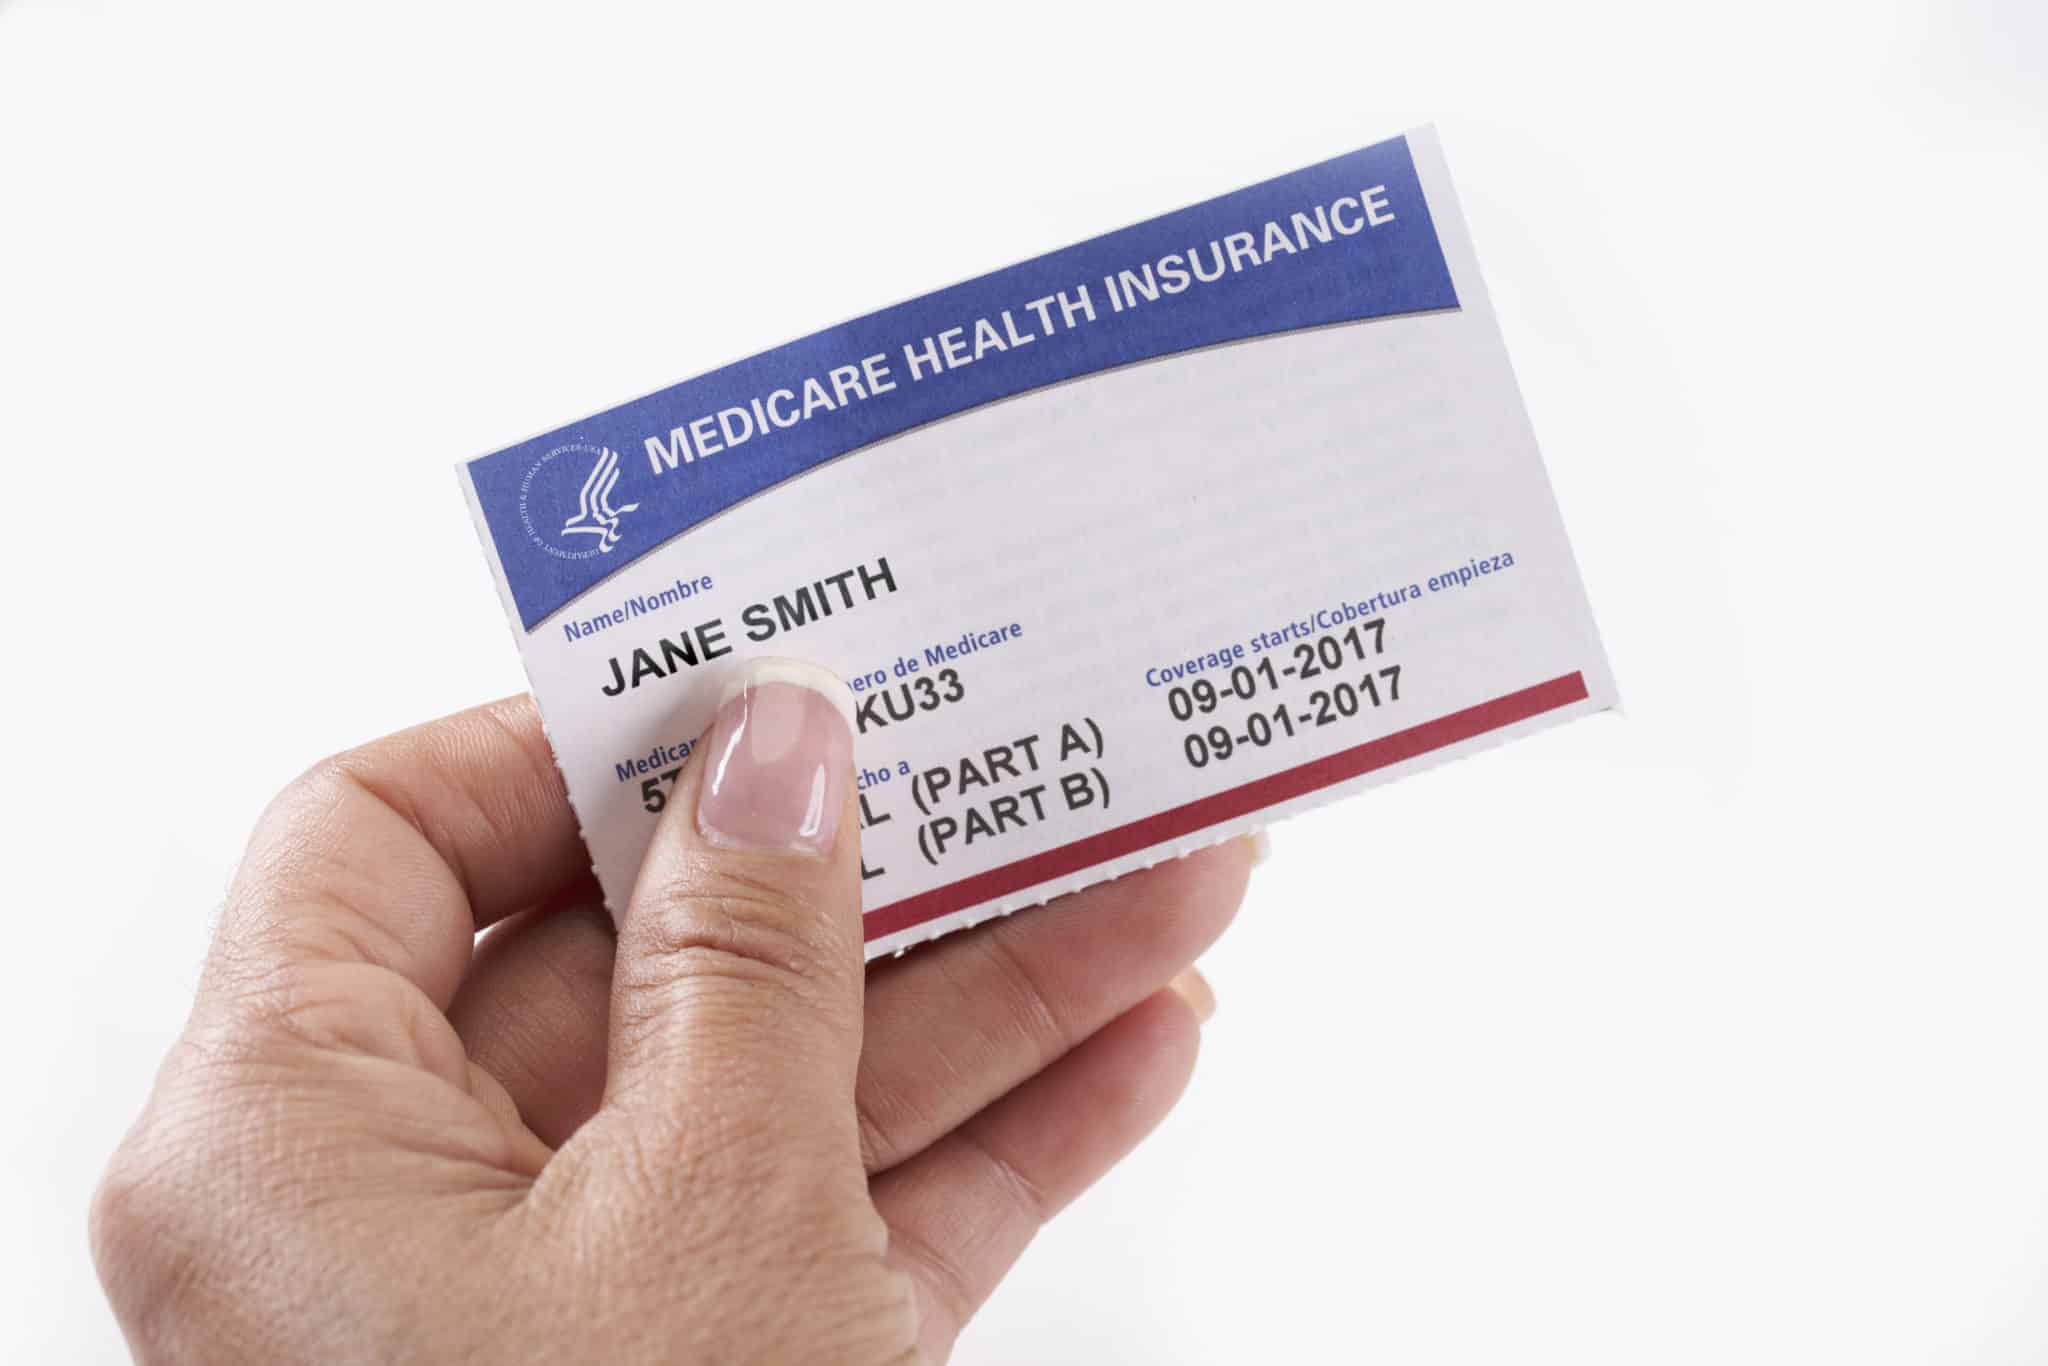 Medicare Health Insurance Card with white background in hand